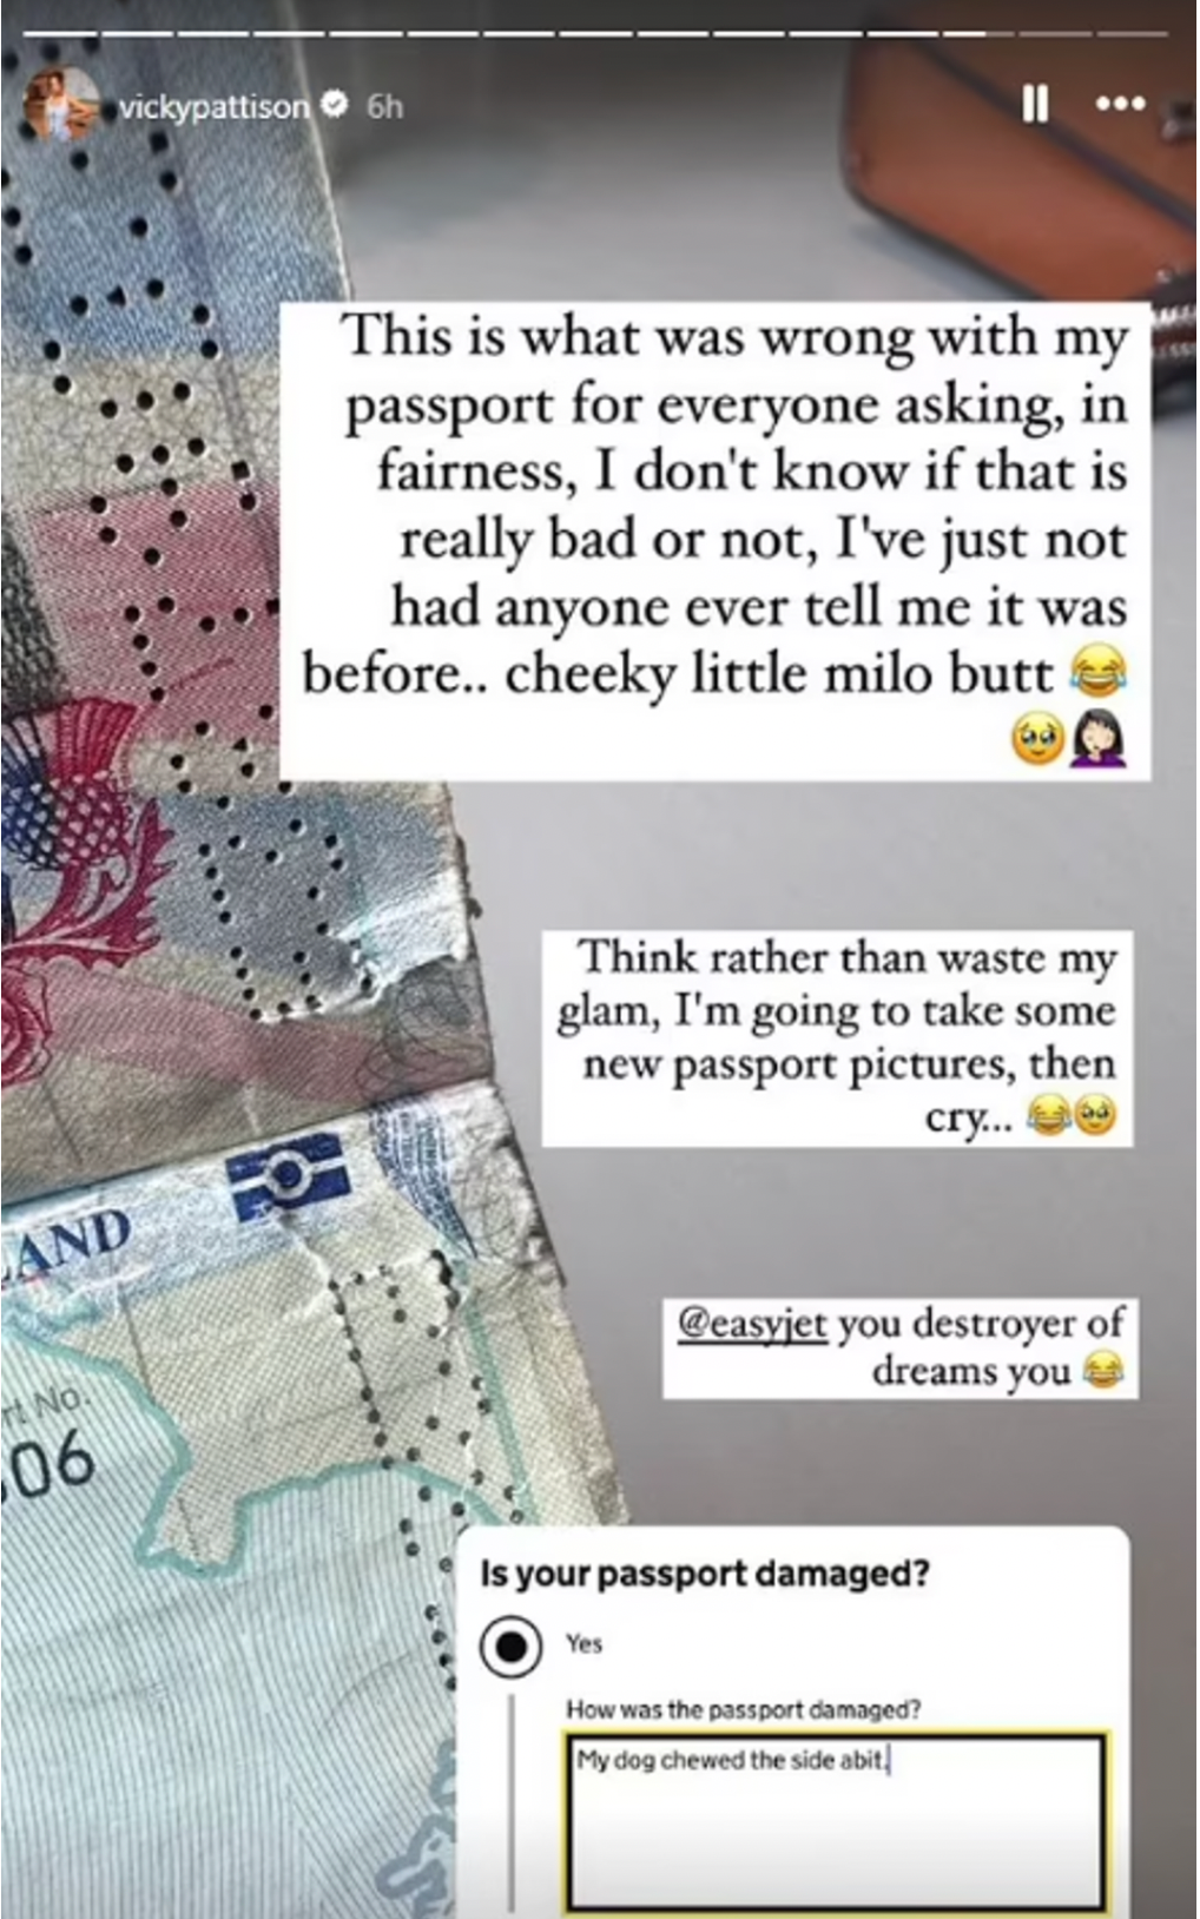 Pattison shared a photo of the damage to her passport on Instagram (Instagram/Vicky Pattison)